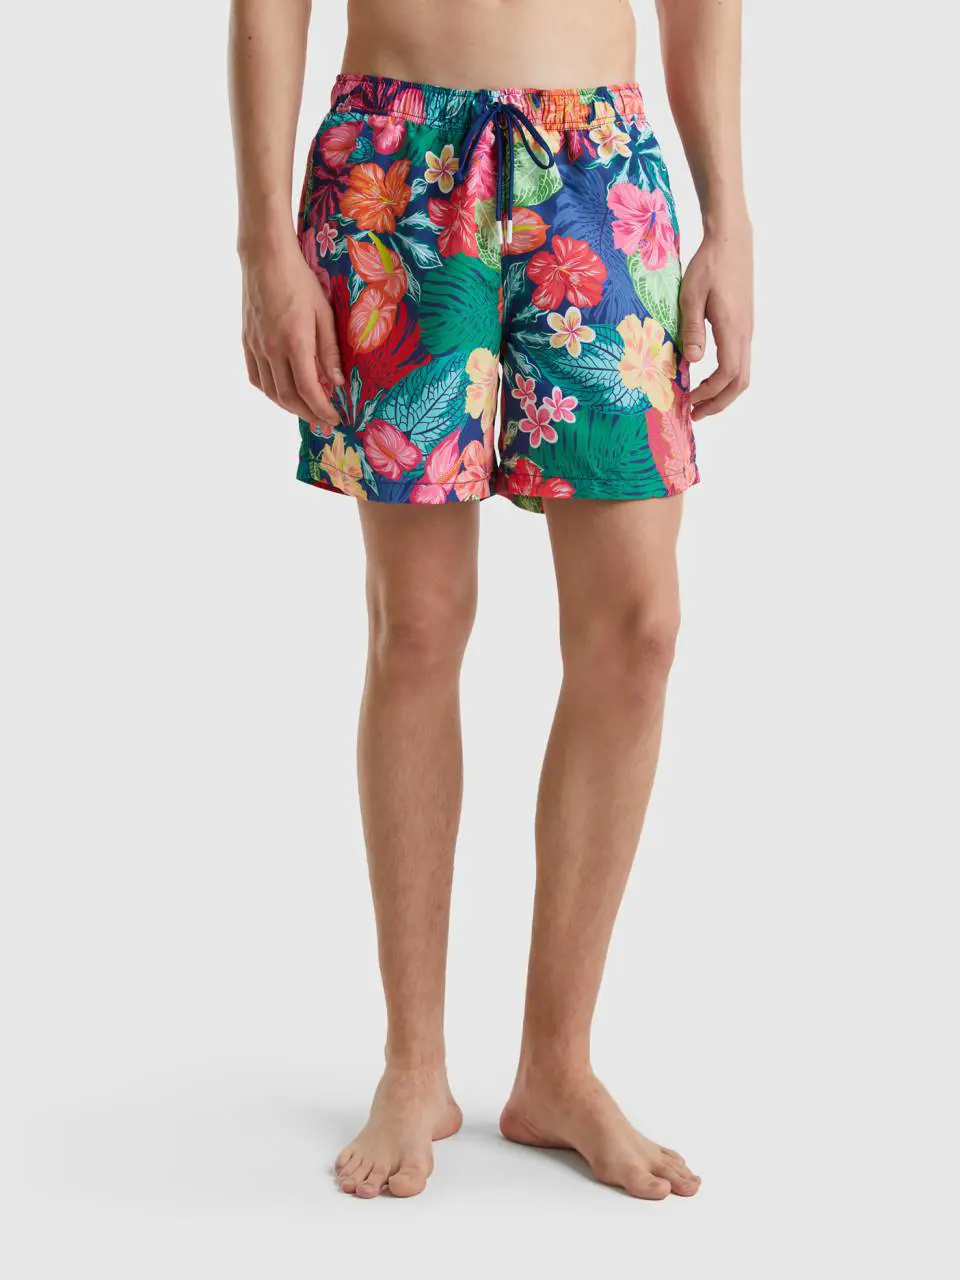 Benetton swim trunks with floral print. 1